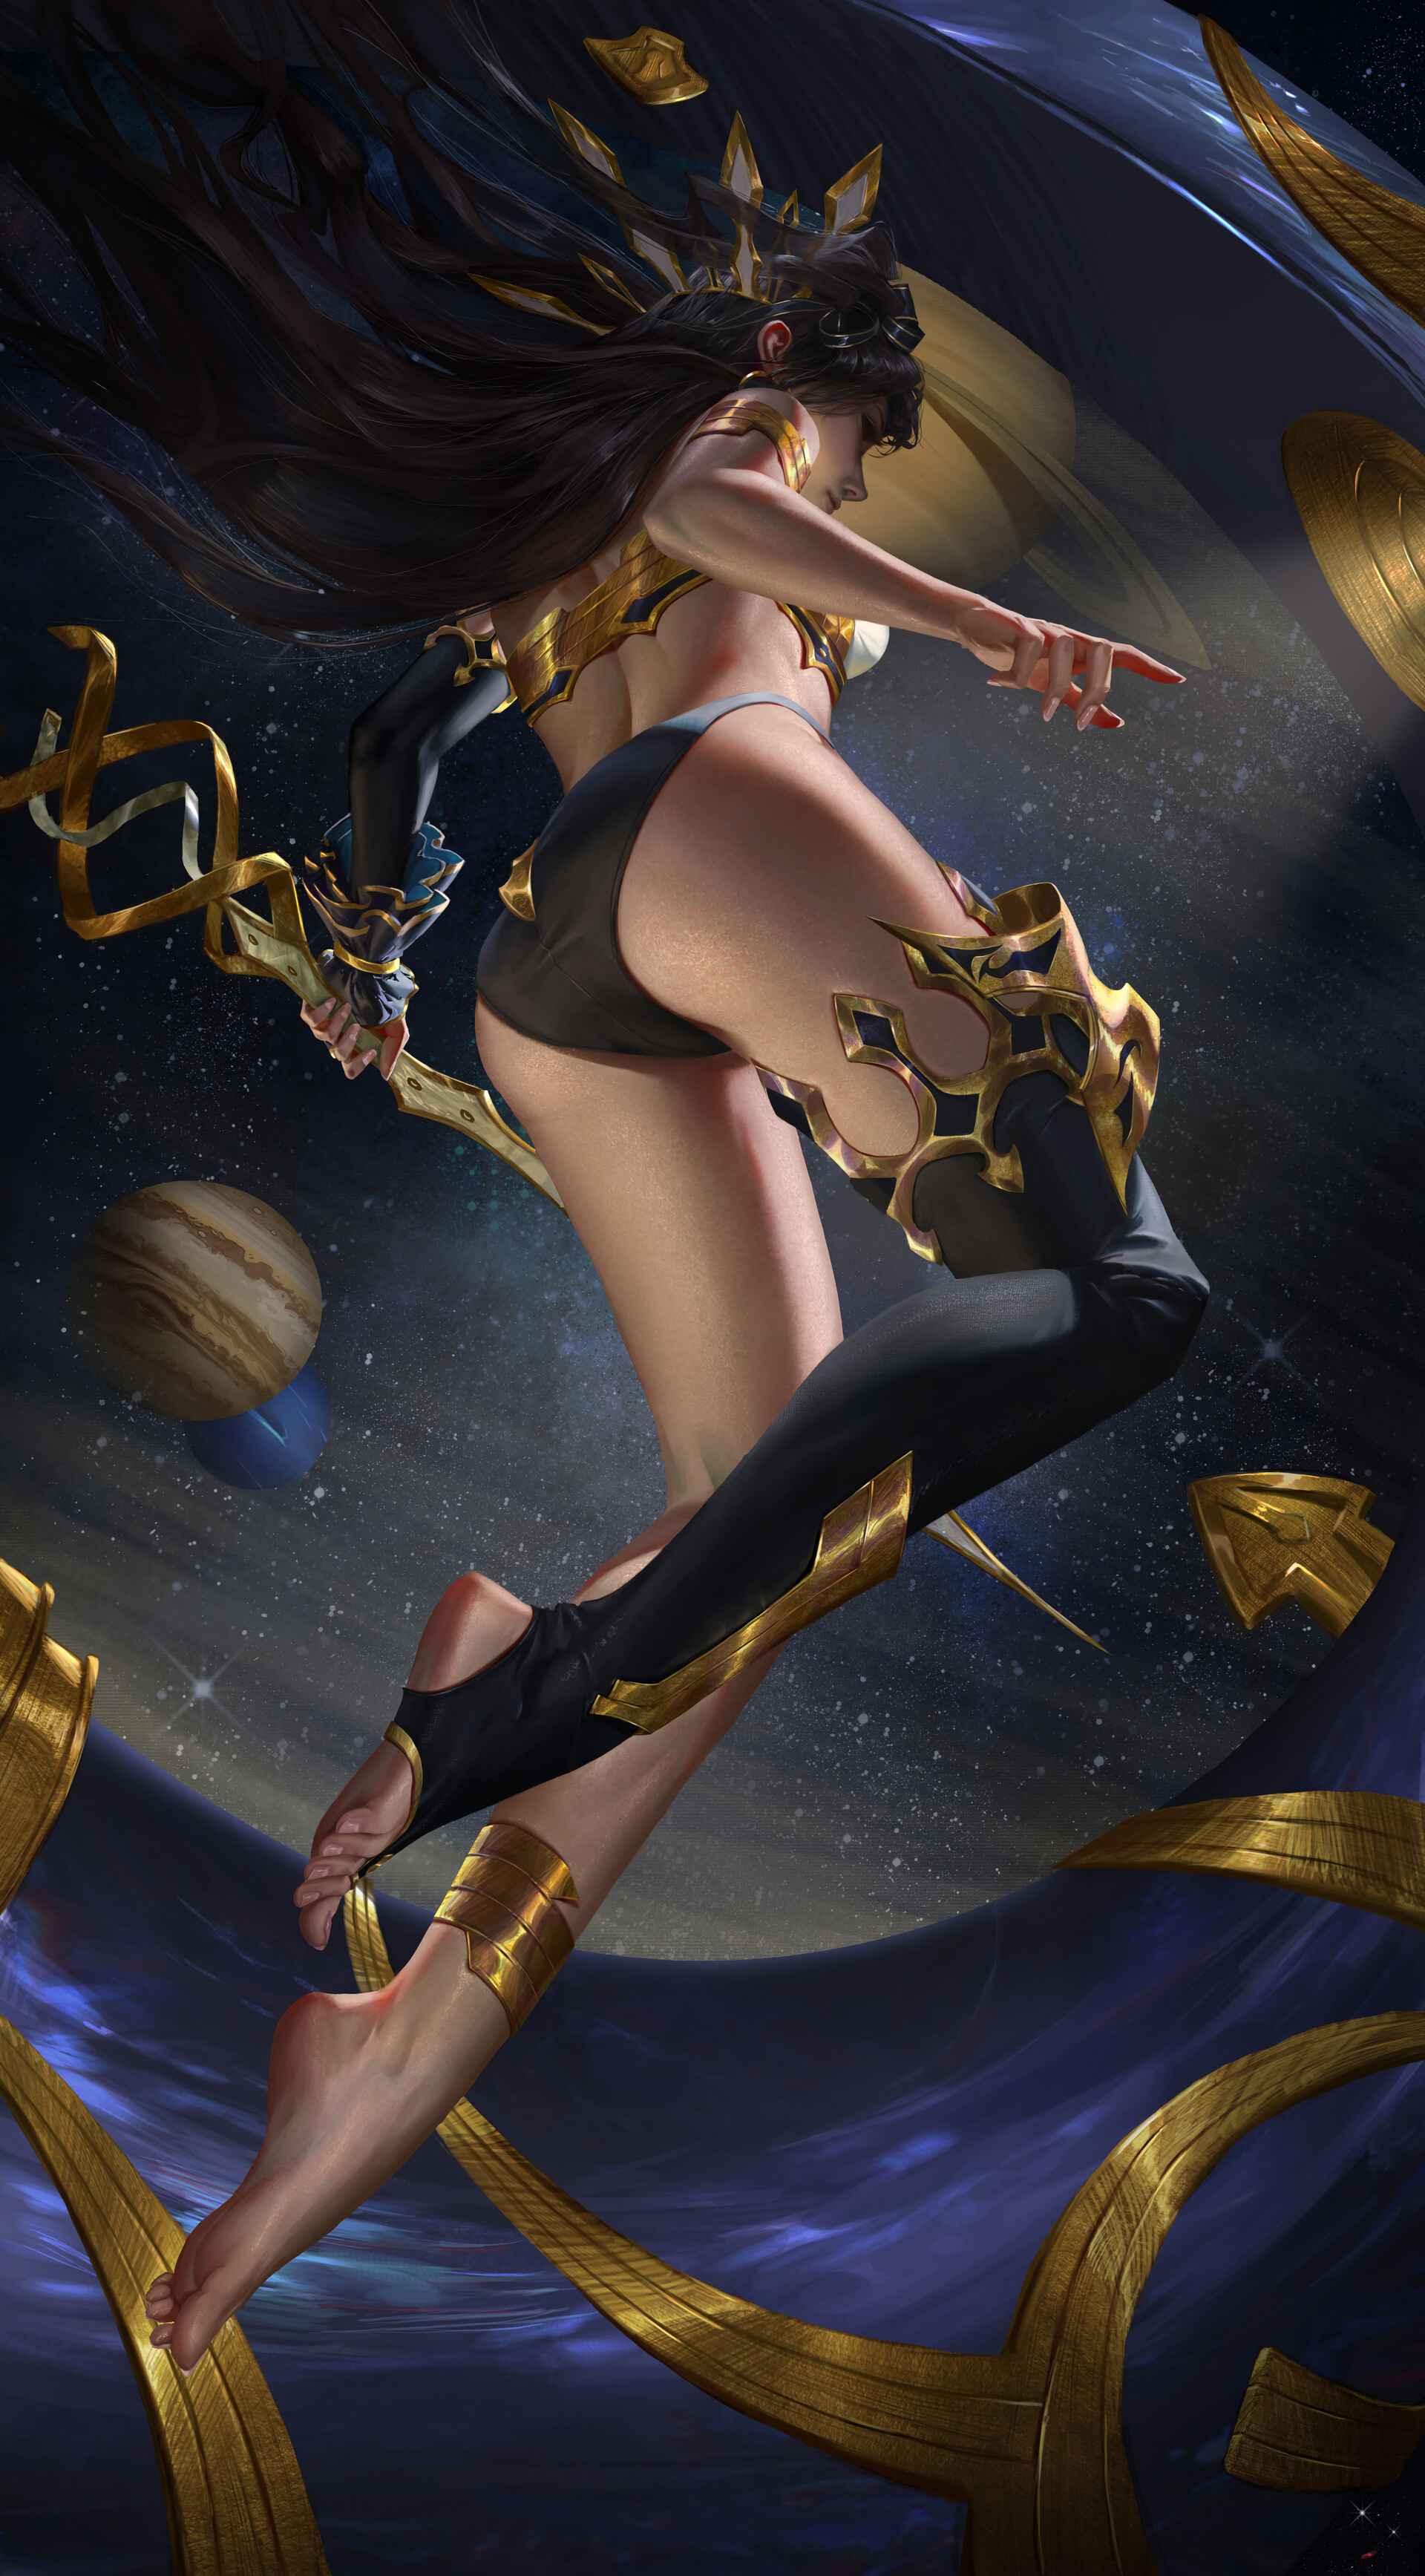 Anime 1920x3470 Fate/Grand Order Fate series Ishtar (Fate/Grand Order) anime girls fan art digital art anime video games portrait display black hair long hair weapon space planet low-angle